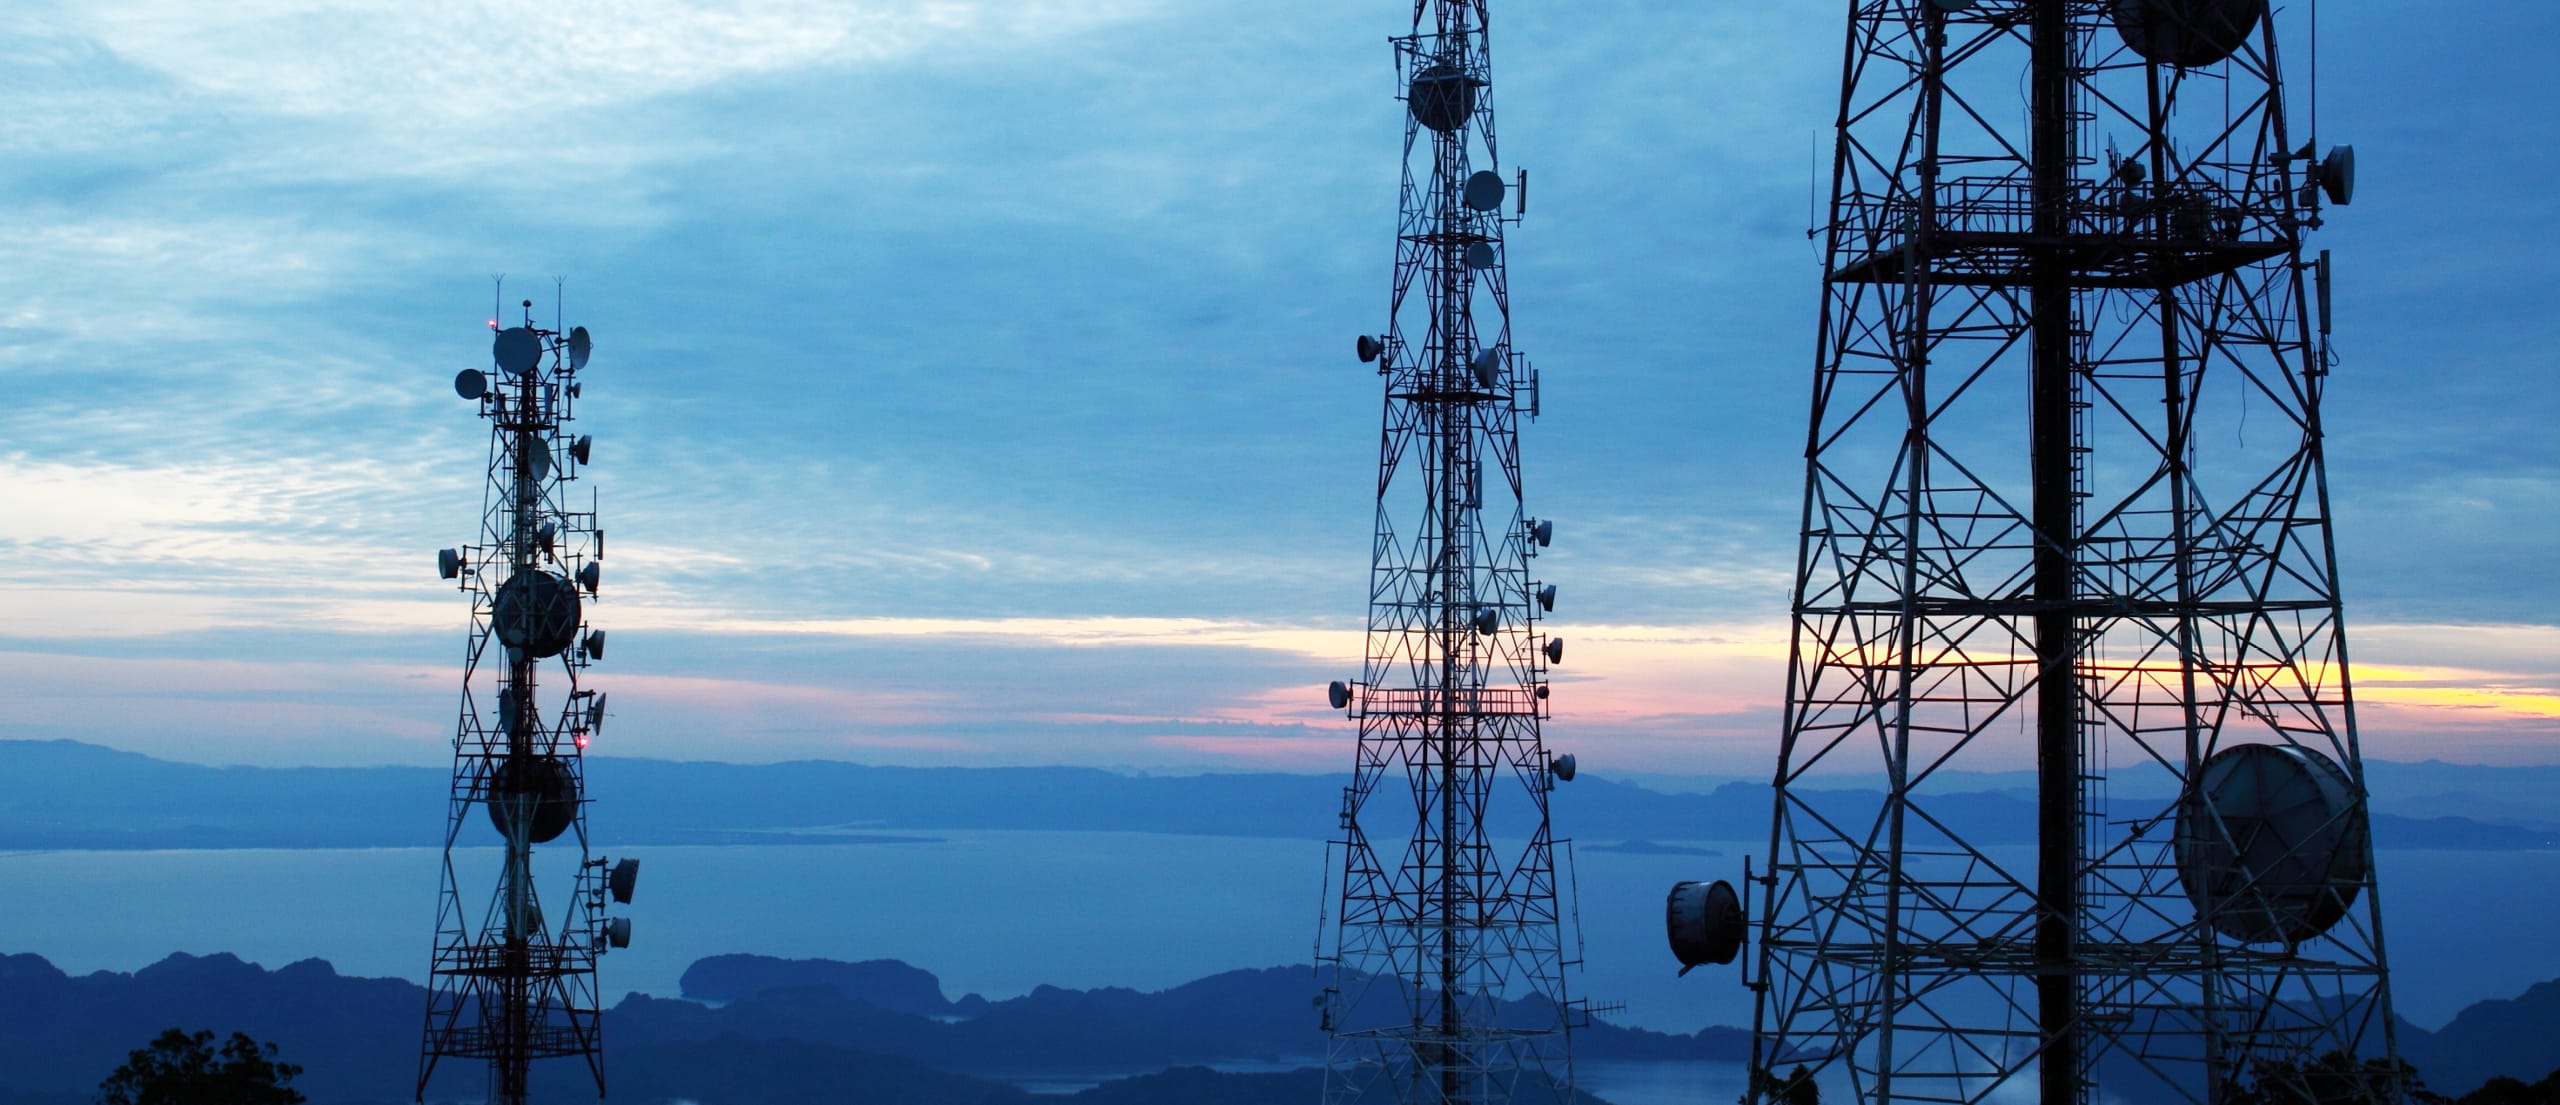 This image shows a skyline at dusk with cellular towers visibile.